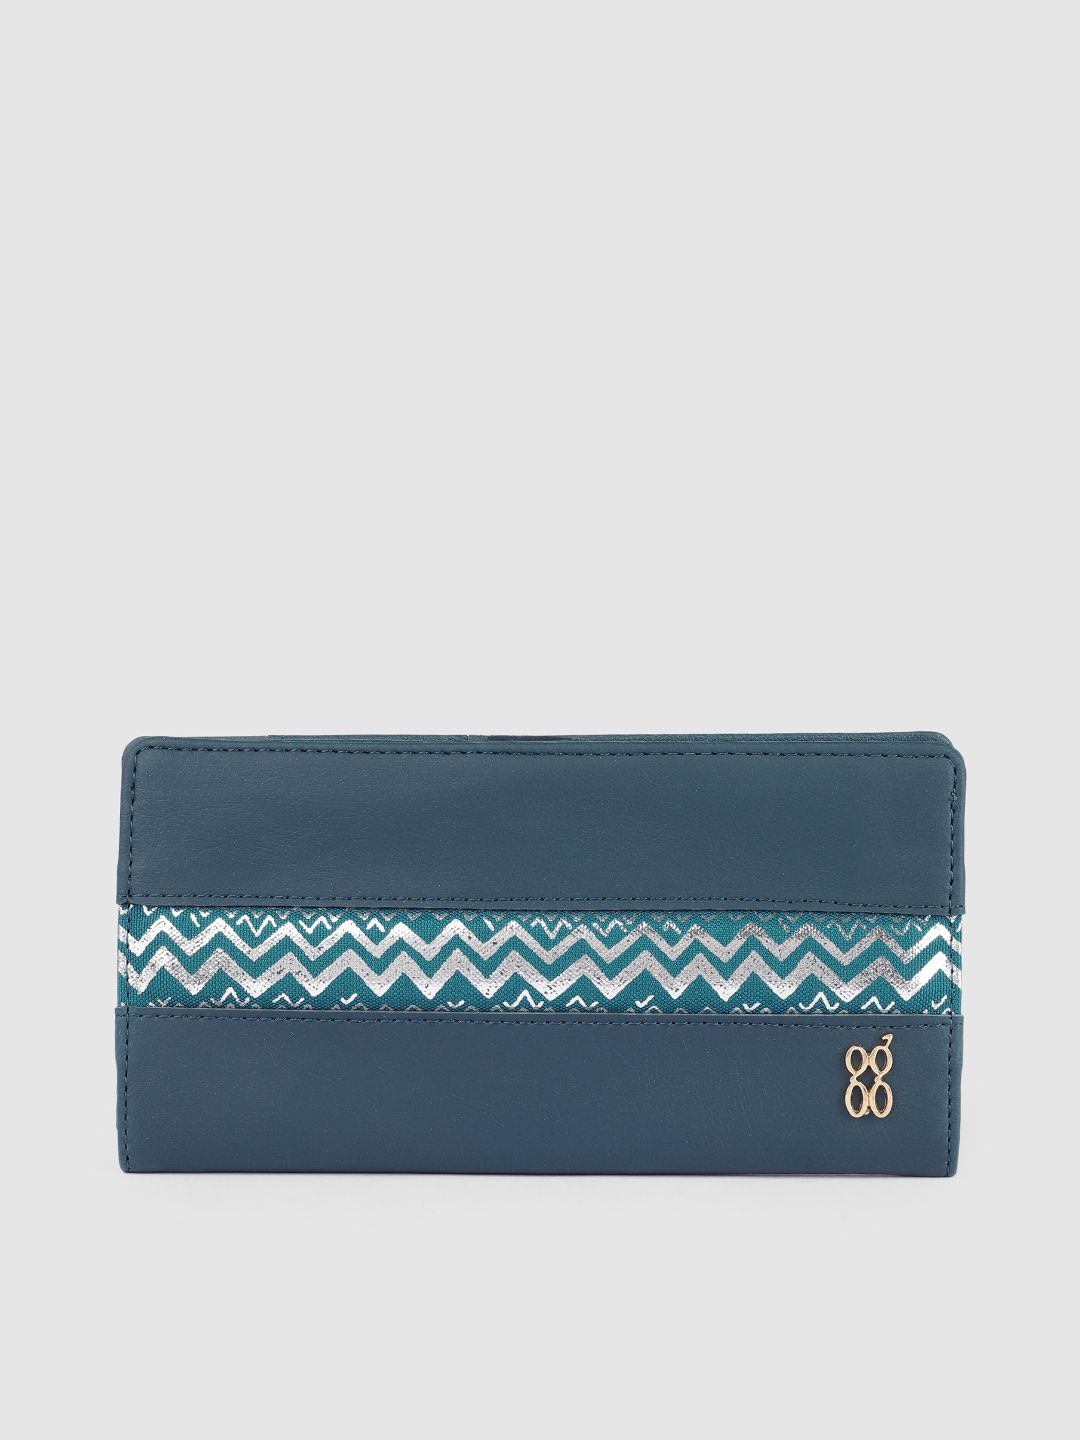 Baggit Women Teal Blue & Silver-Toned Two Fold Wallet Price in India